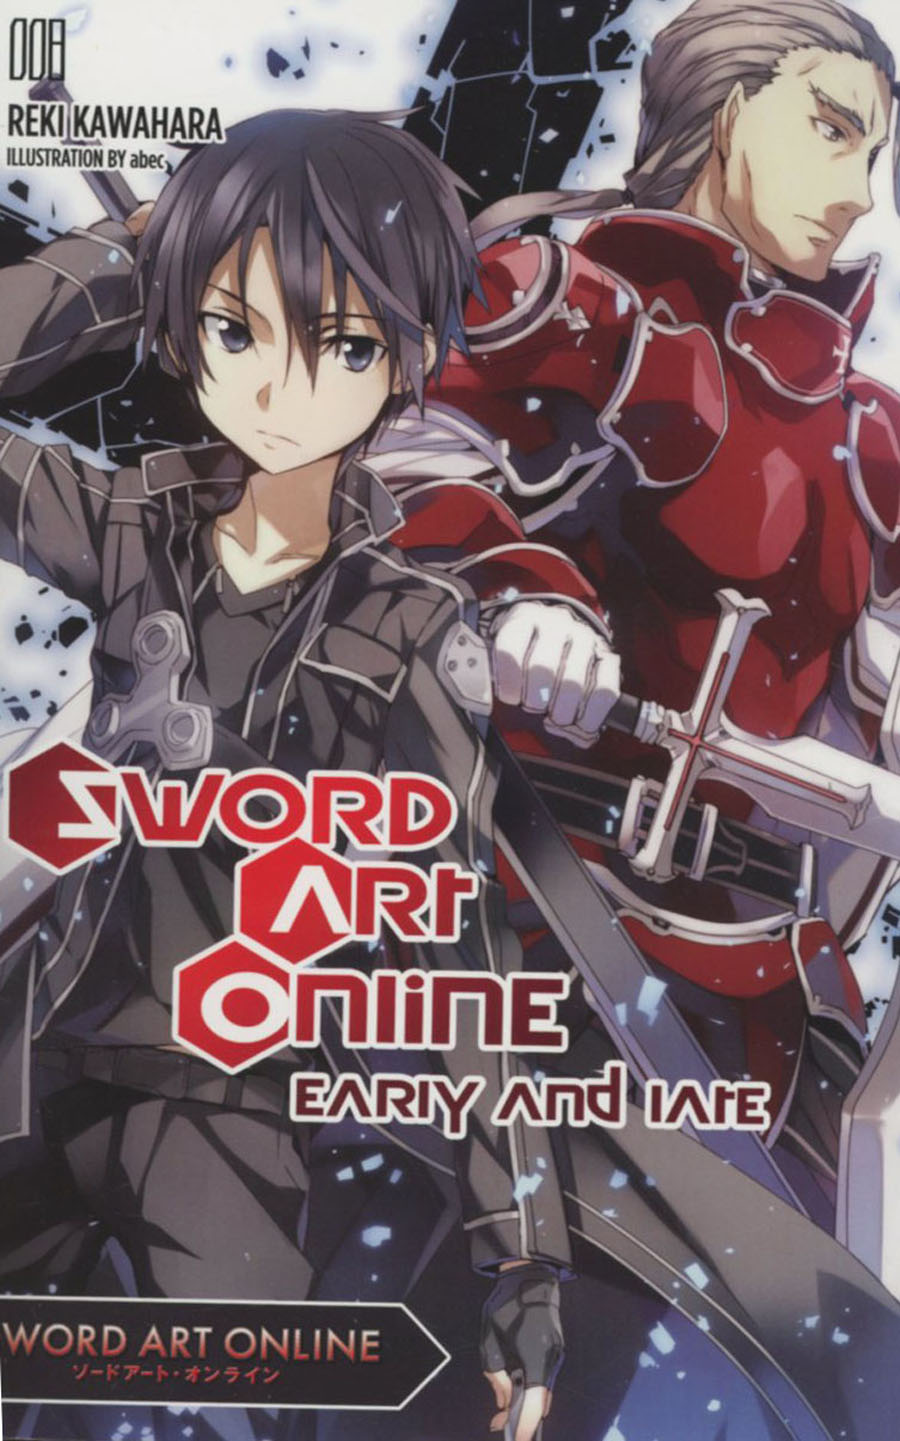 Sword Art Online Novel Vol 8 Early And Late